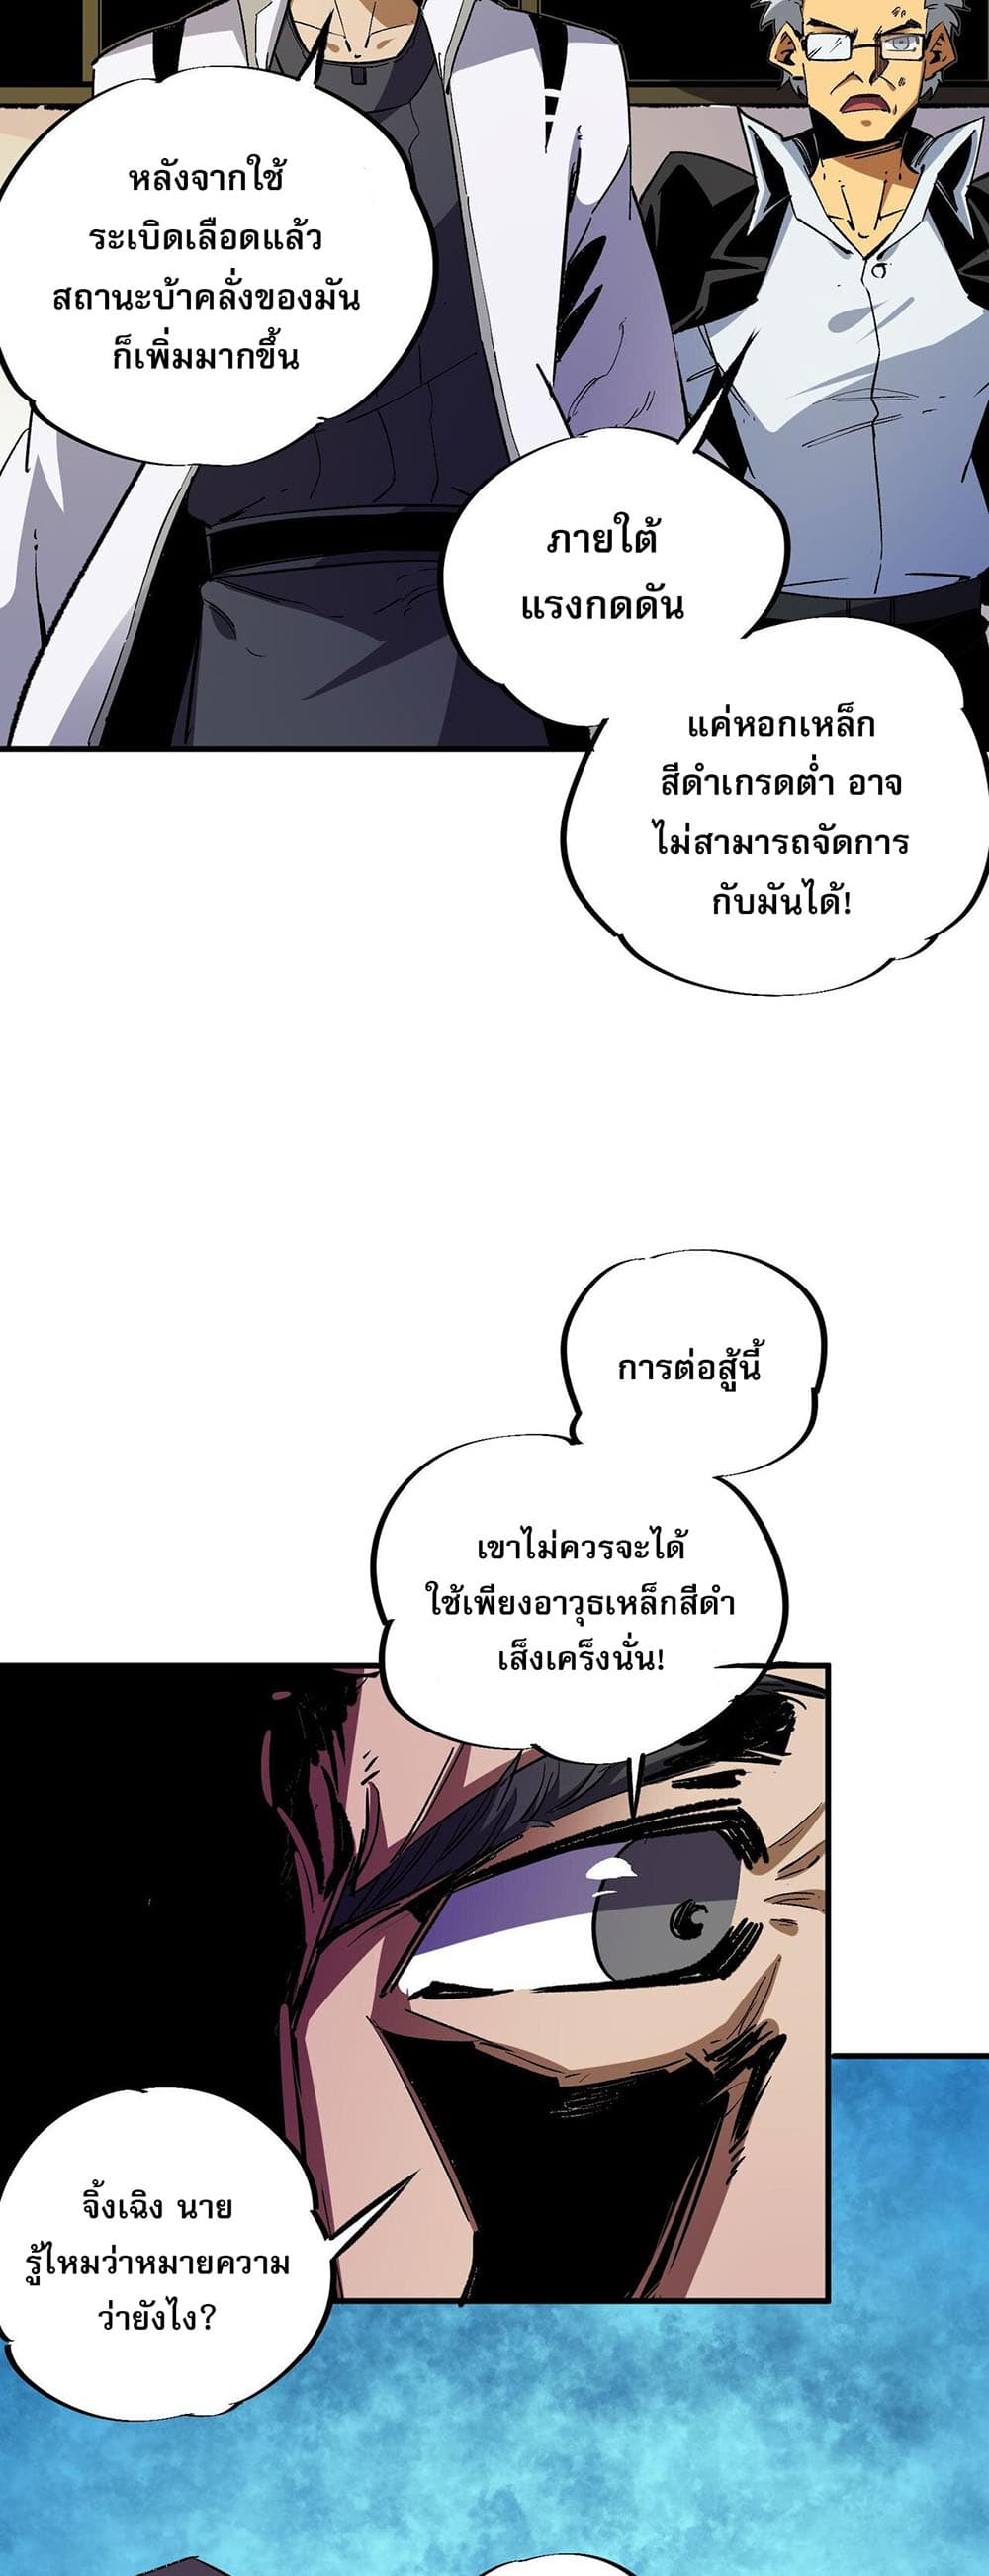 Job Changing for the Entire Population: The Jobless Me Will Terminate the Gods ฉันคือผู้เล่นไร้อาชีพที่สังหารเหล่าเทพ 7-7